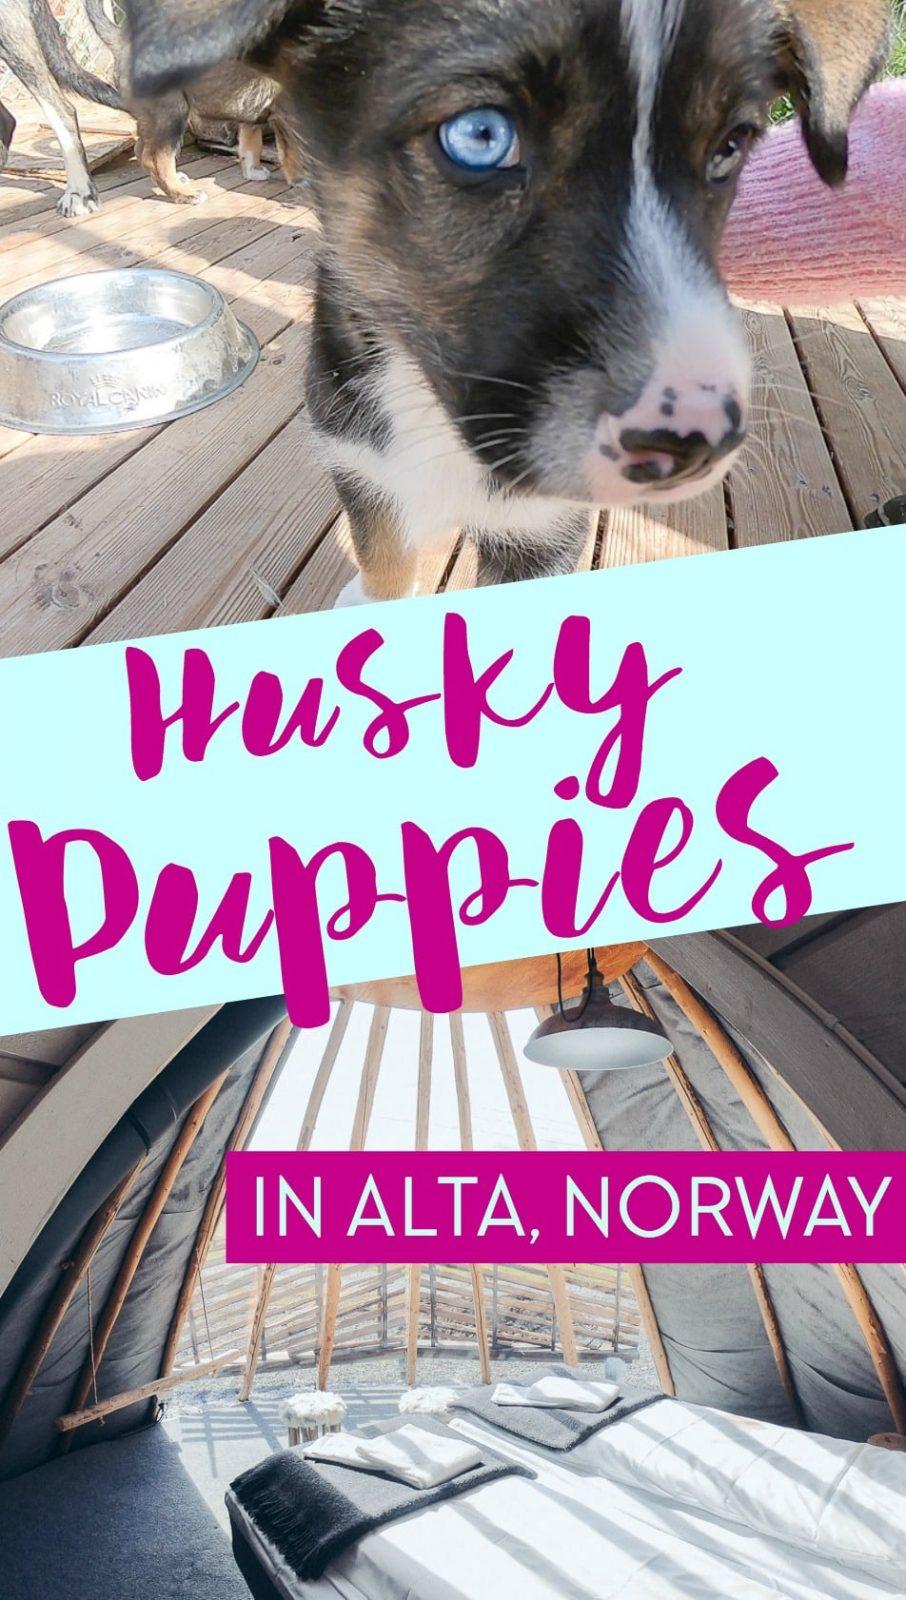 If you stay at Holmen Husky Lodge in Alta, Northern Norway in the summer you can play with the husky puppies!